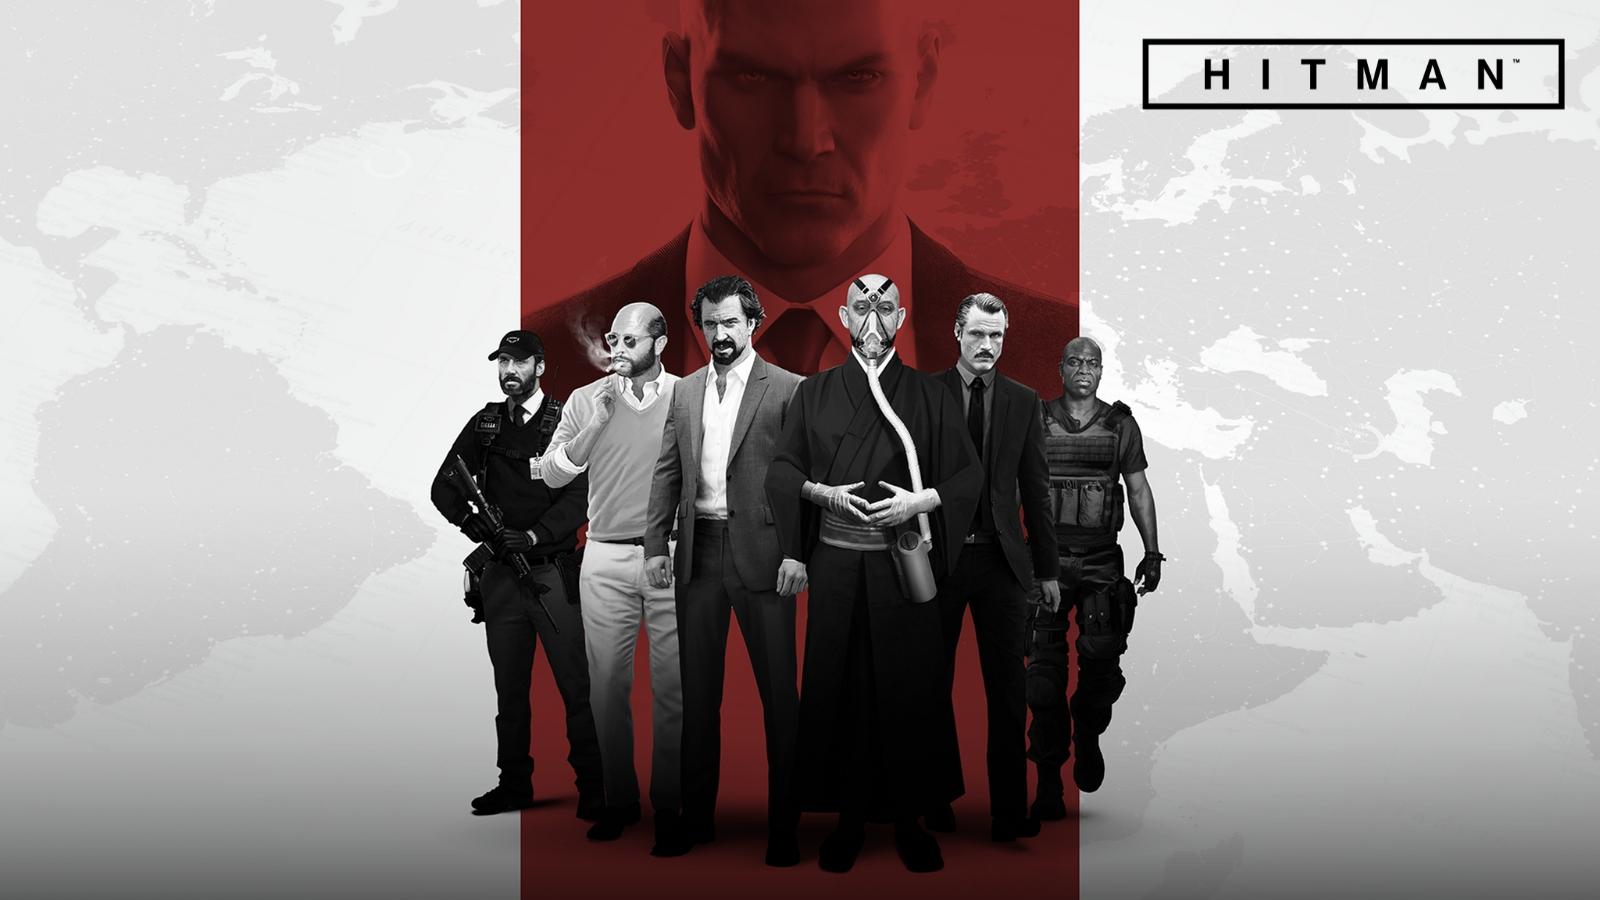 After the PS5 return, you can now Get Hitman: Absolution on PC for free